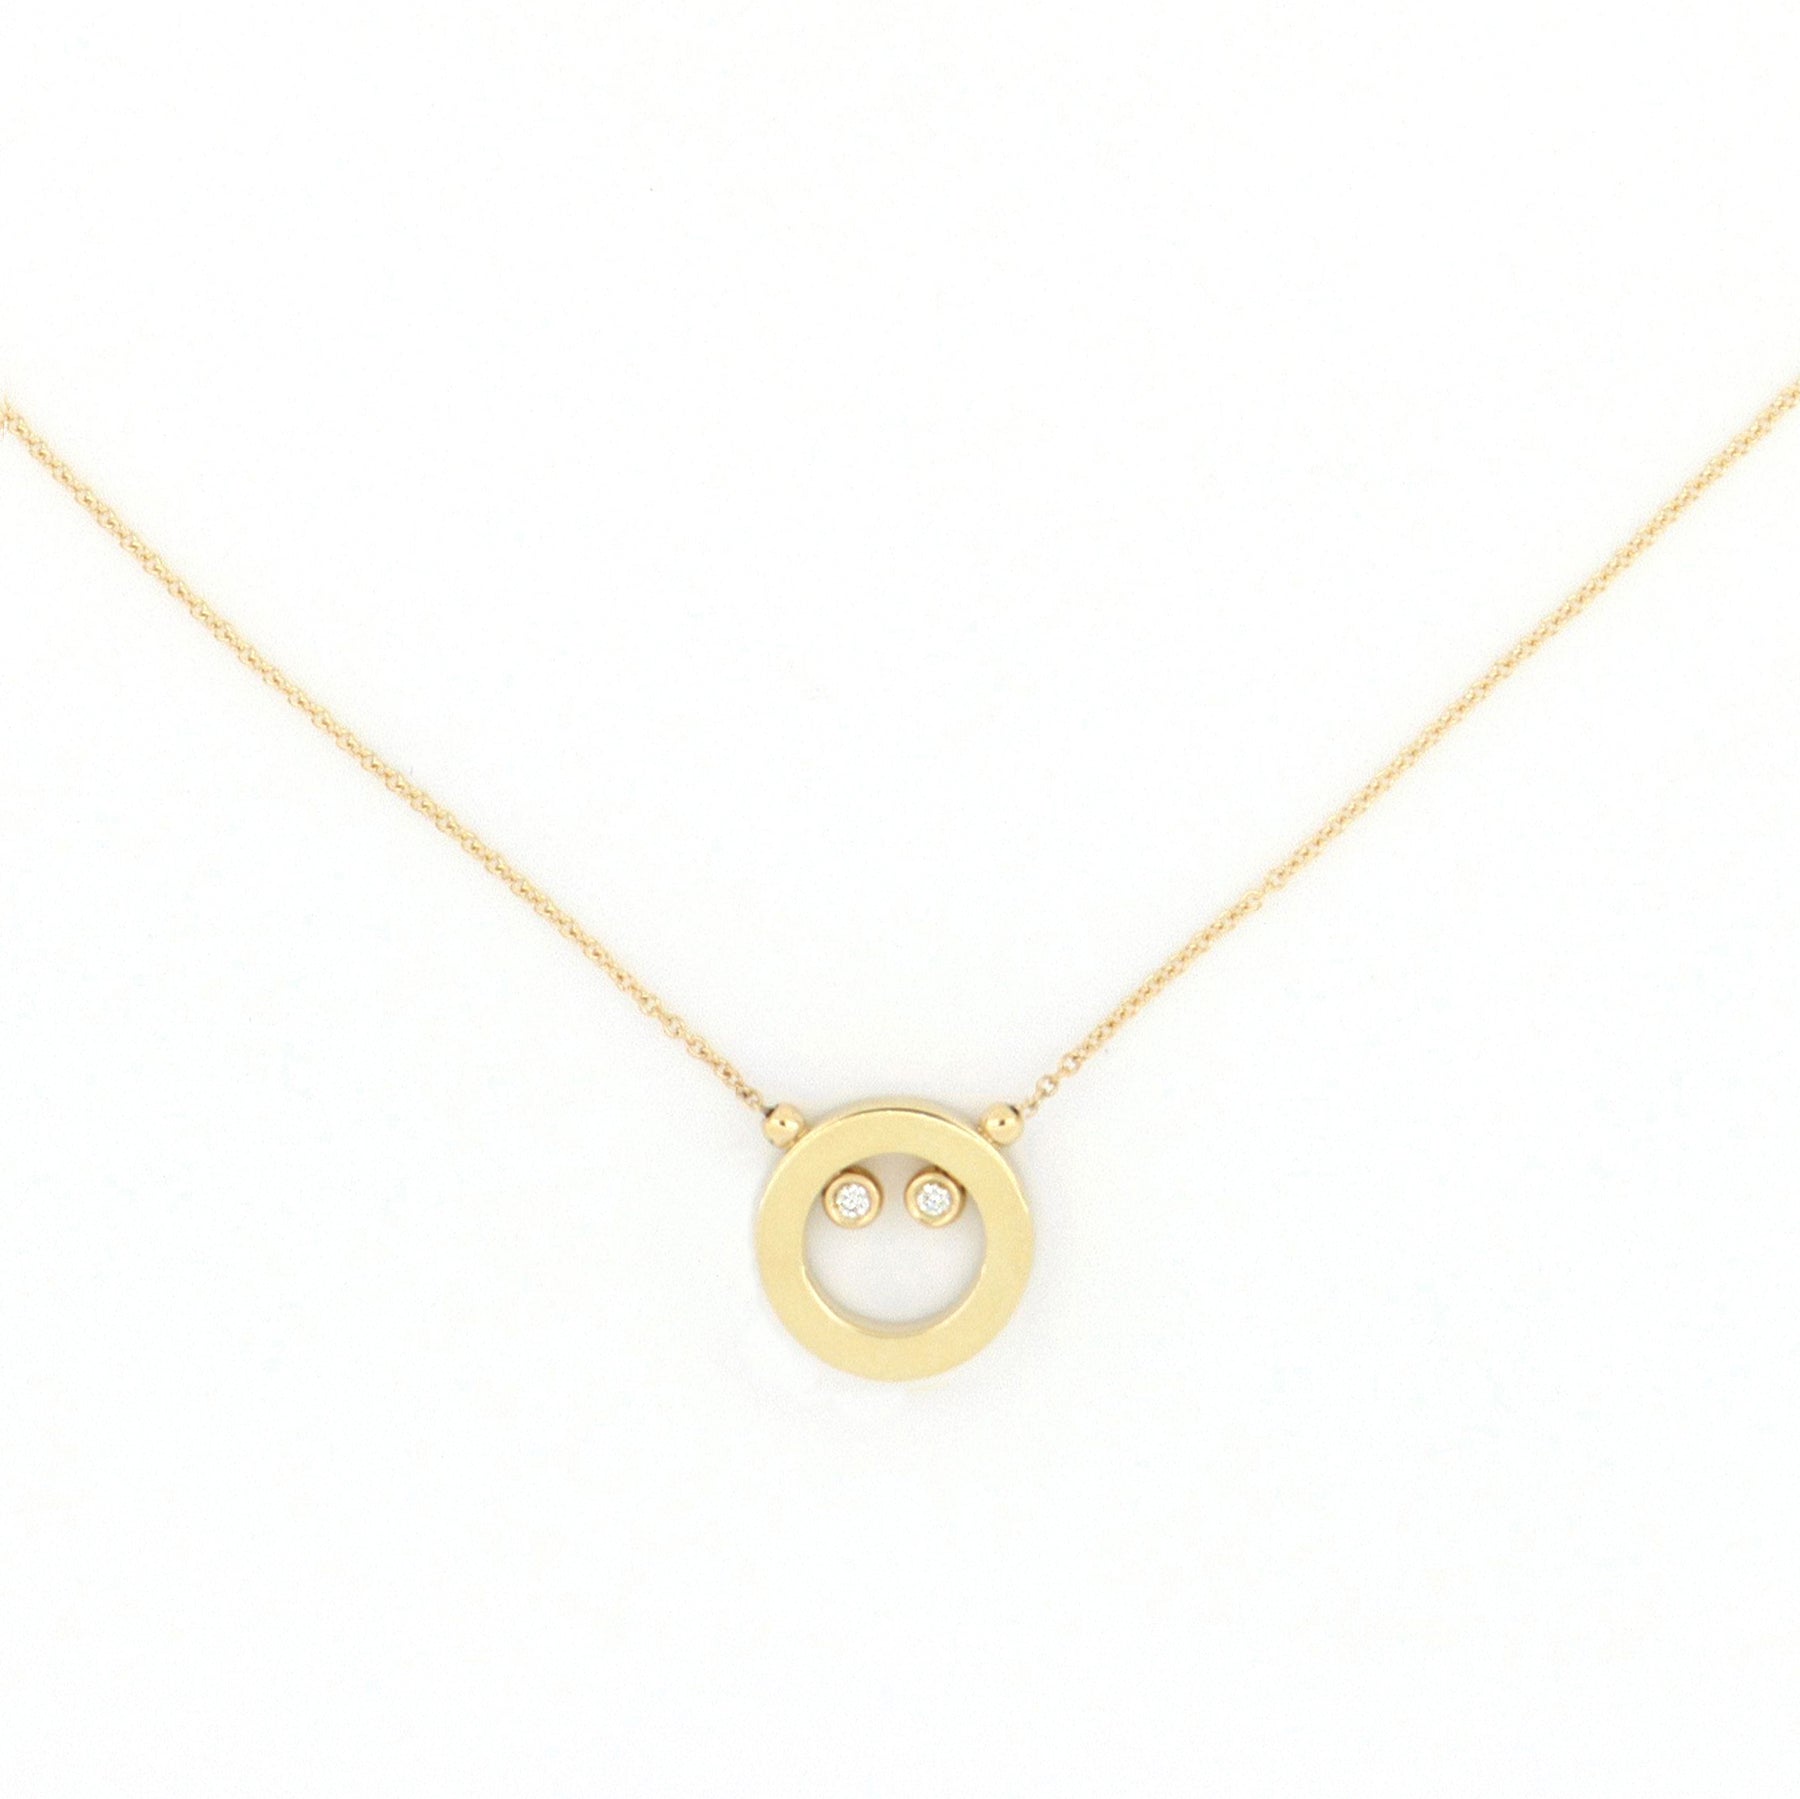 Video Essenza Necklace Polished Gold And Diamonds